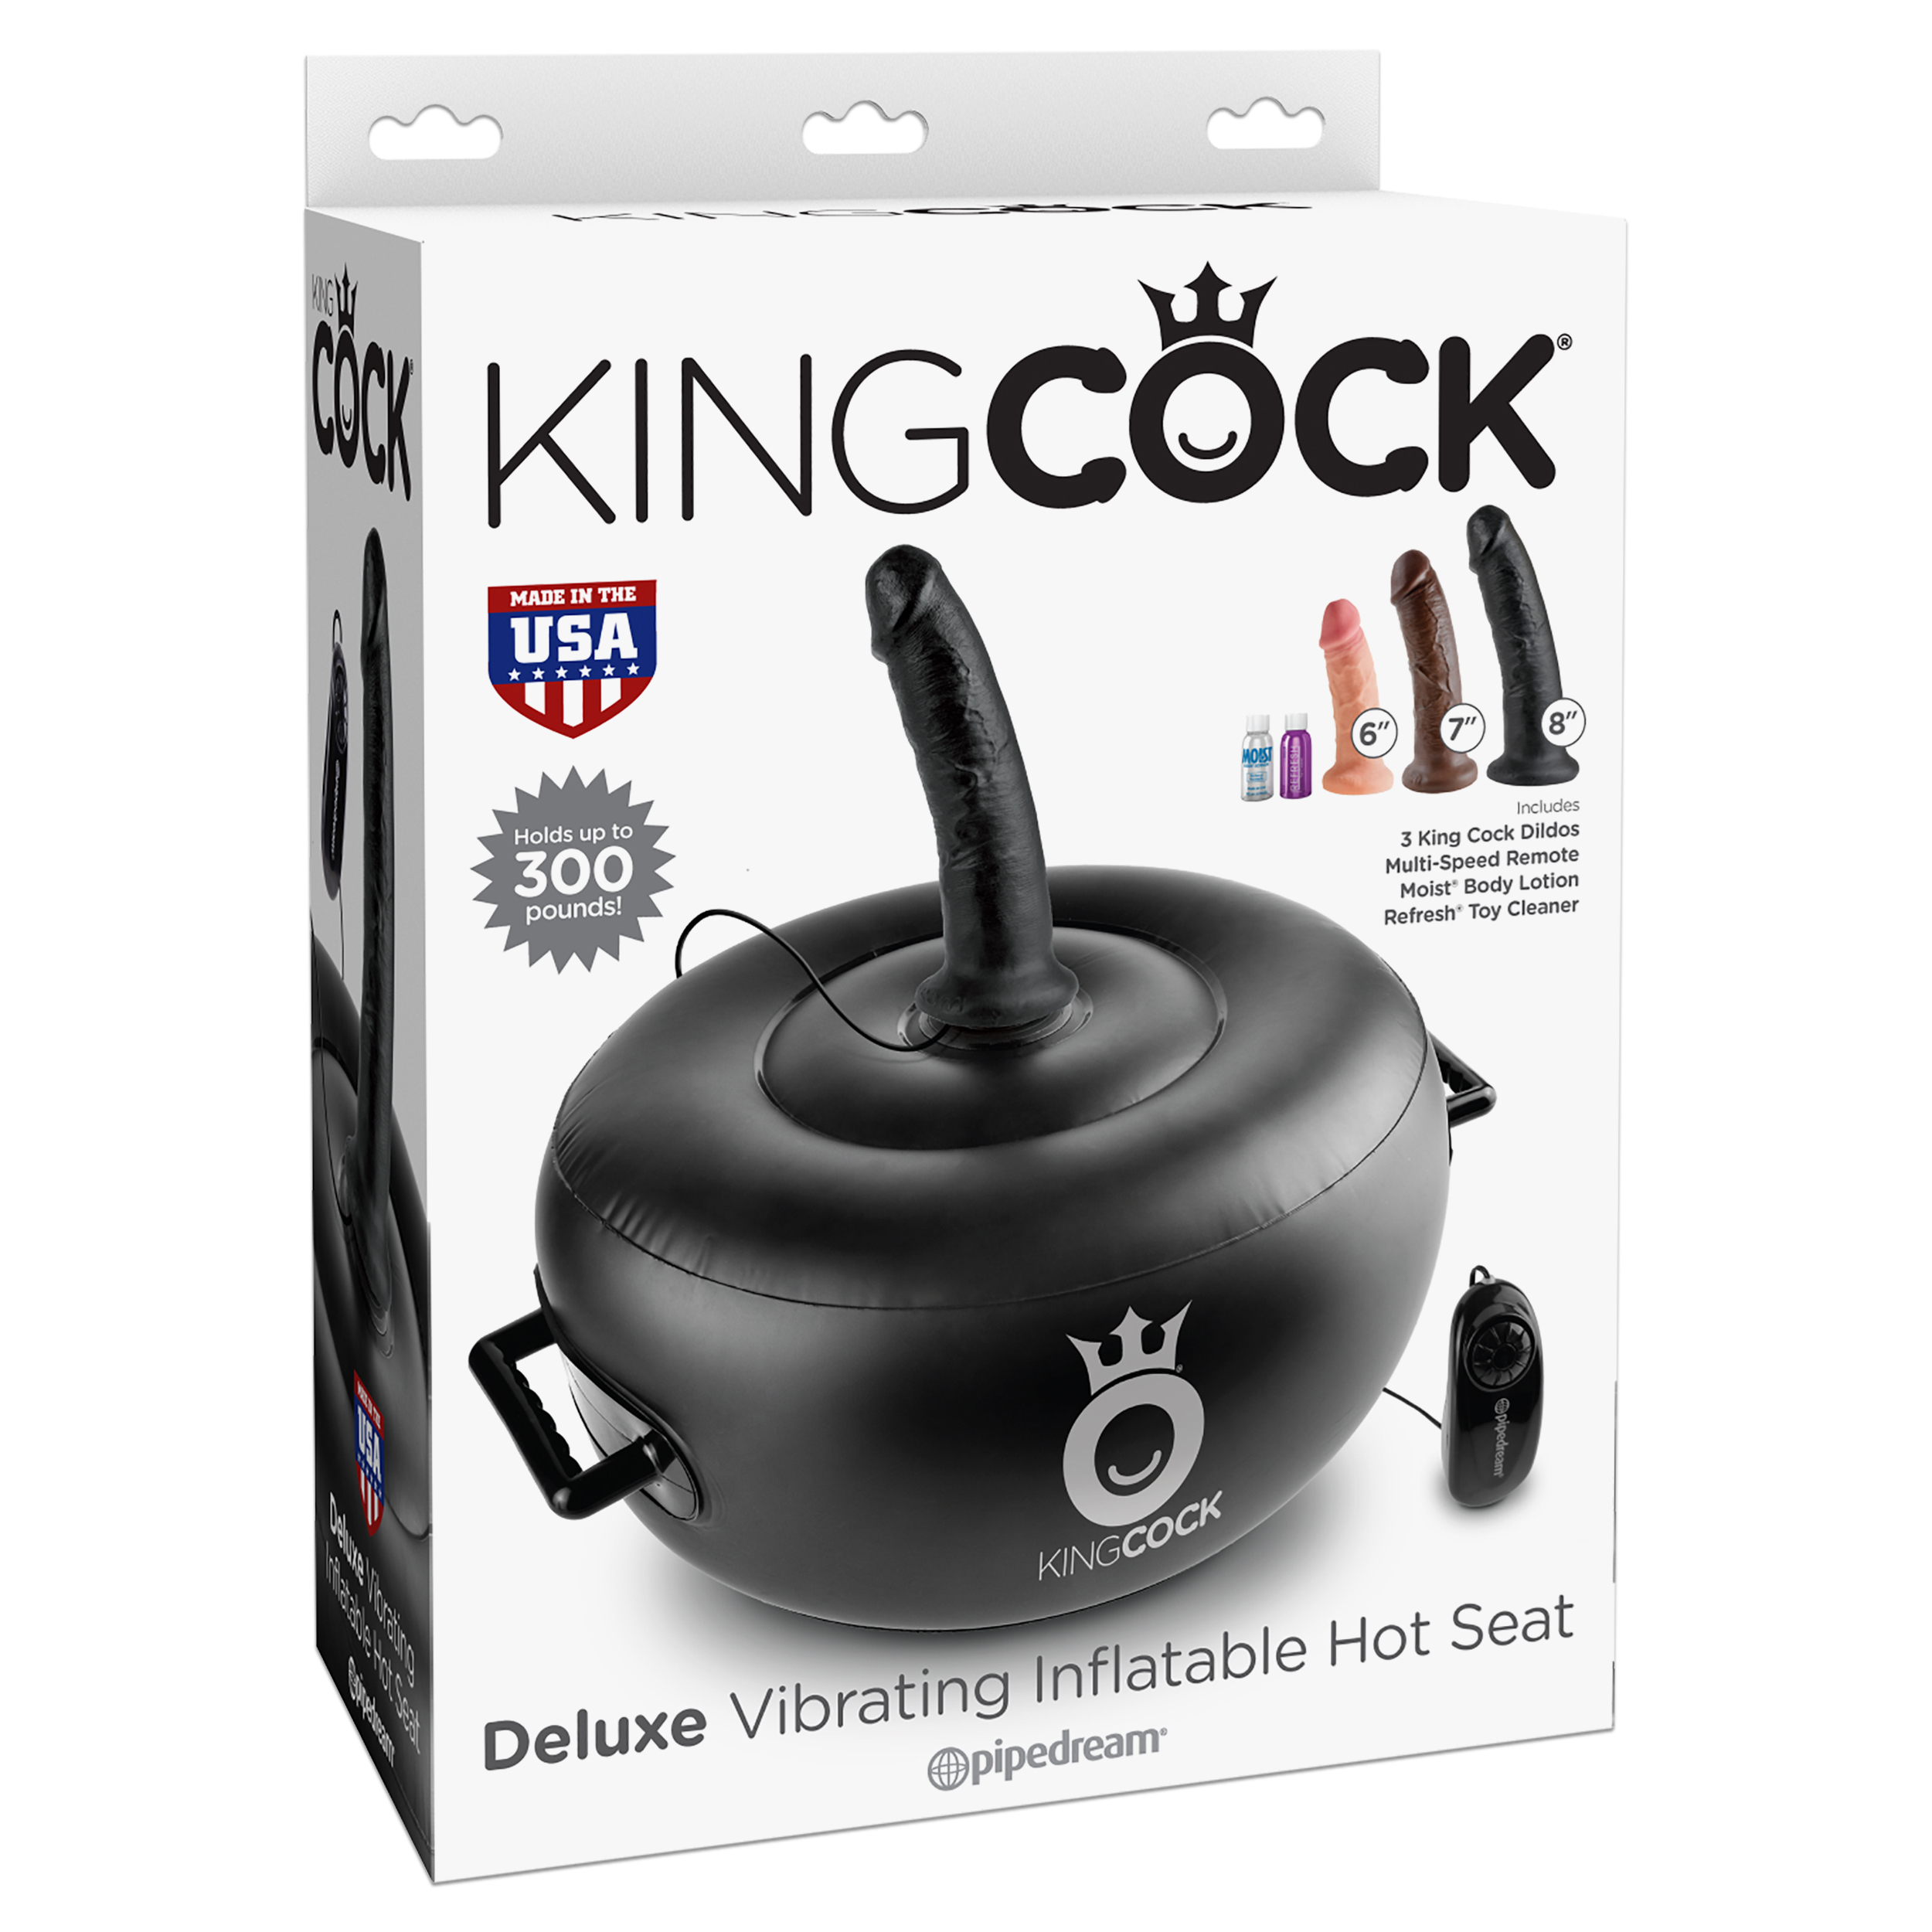 King Cock Deluxe Vibrating Inflatable Hot Seat pic